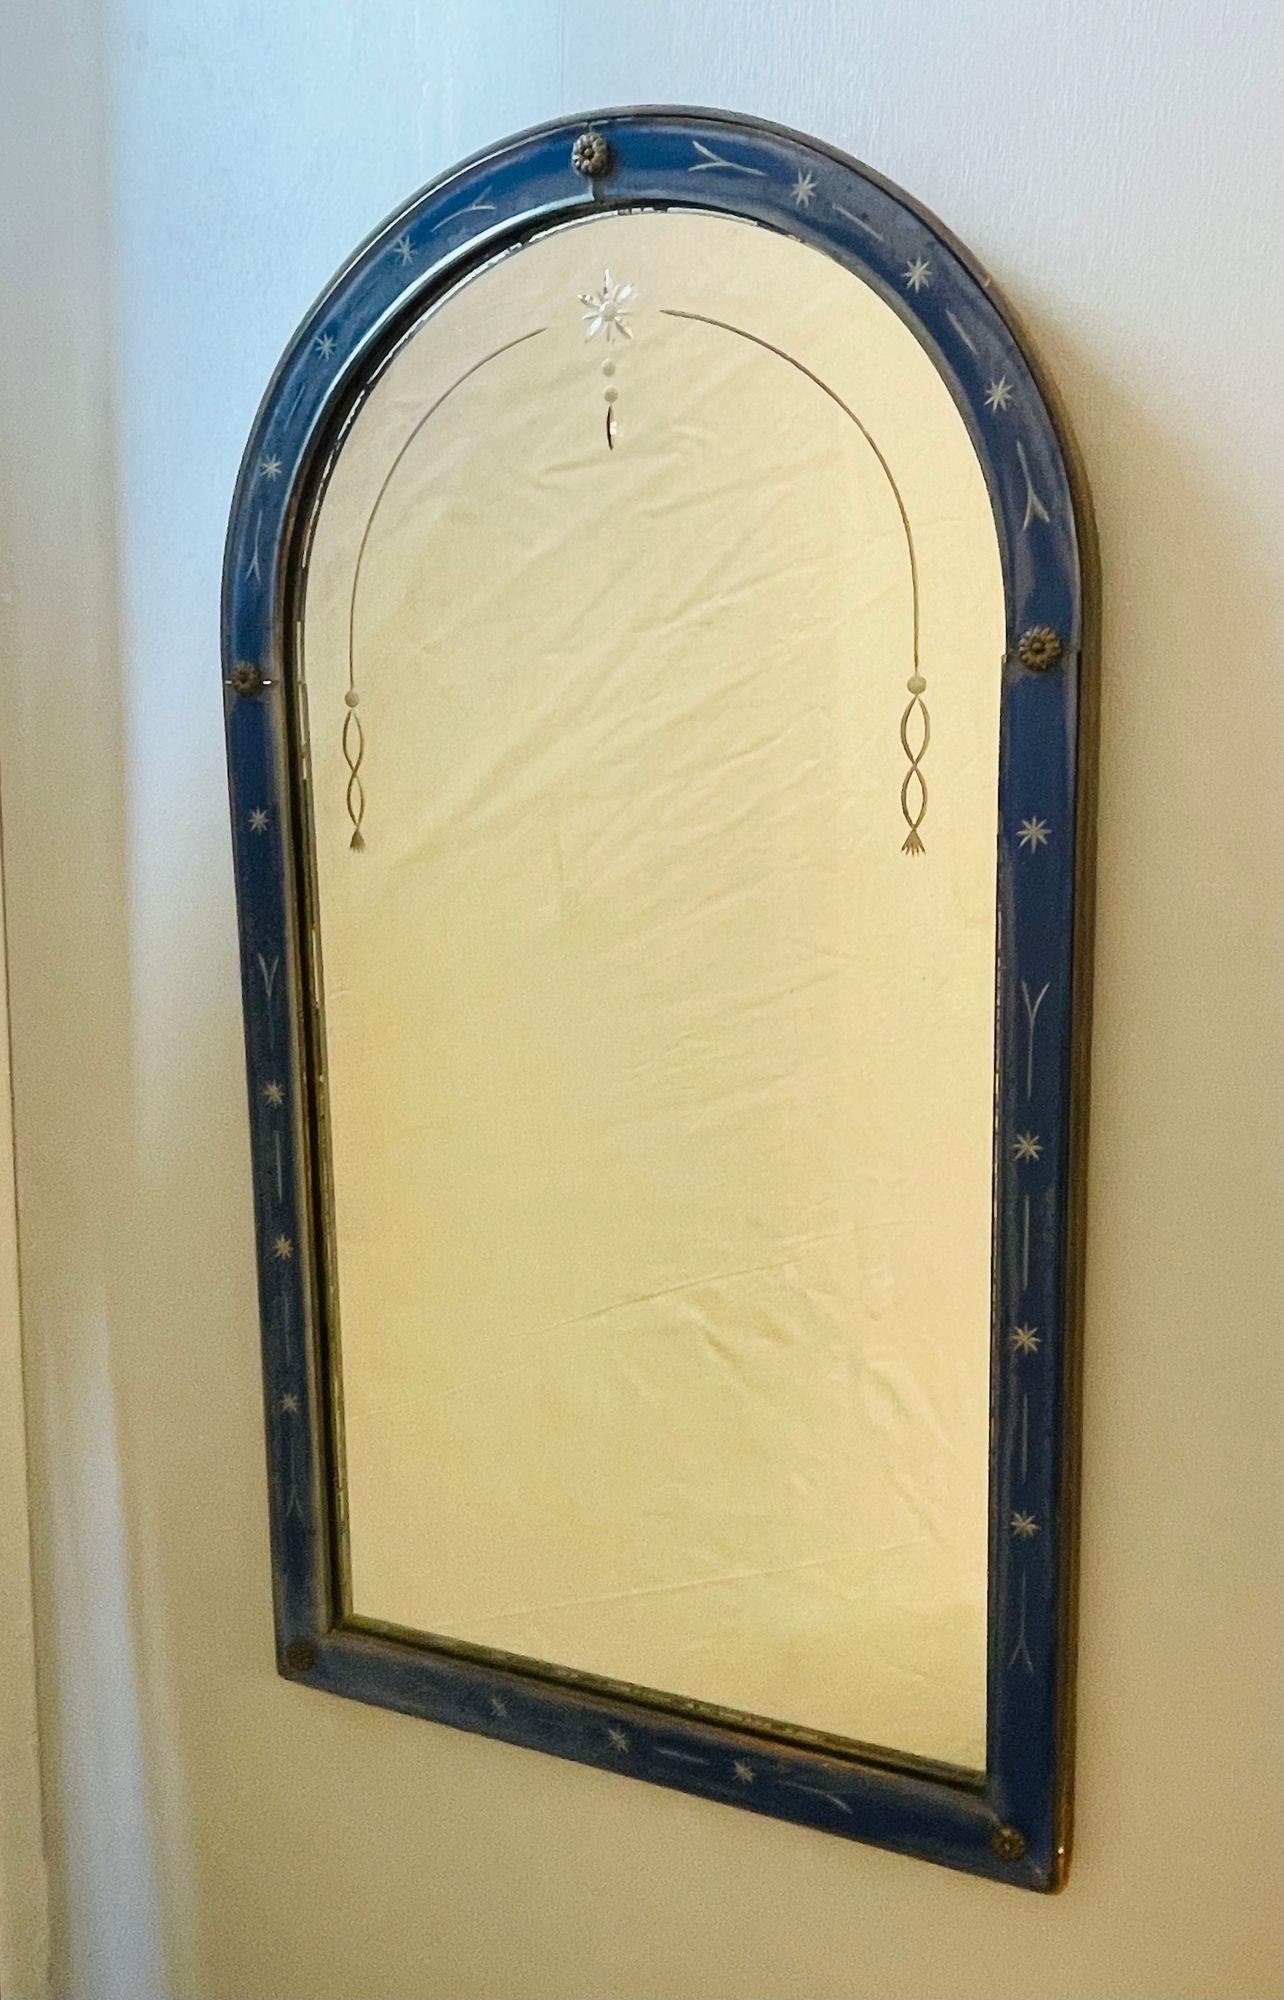 Small Art Deco cobalt wall / console / vanity etched glass mirror, 1940s.
 
An Art Deco cobalt blue wall, console or vanity mirror. Fine etched glass flanked by an etched glass cobalt blue frame. 1940s.